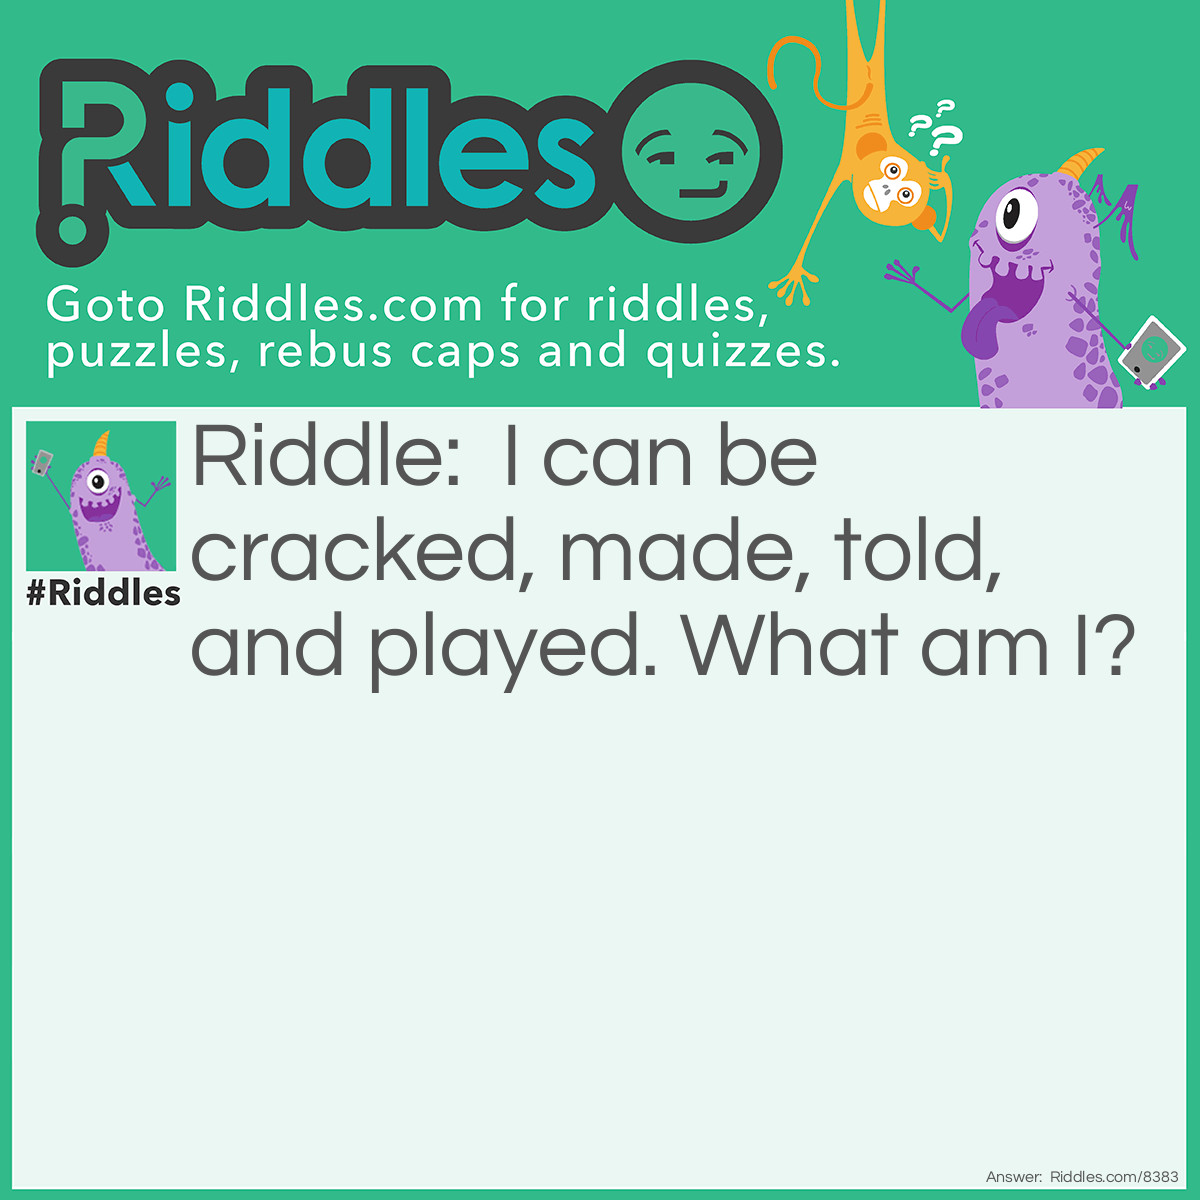 Riddle: I can be cracked, made, told, and played. What am I? Answer: A joke!